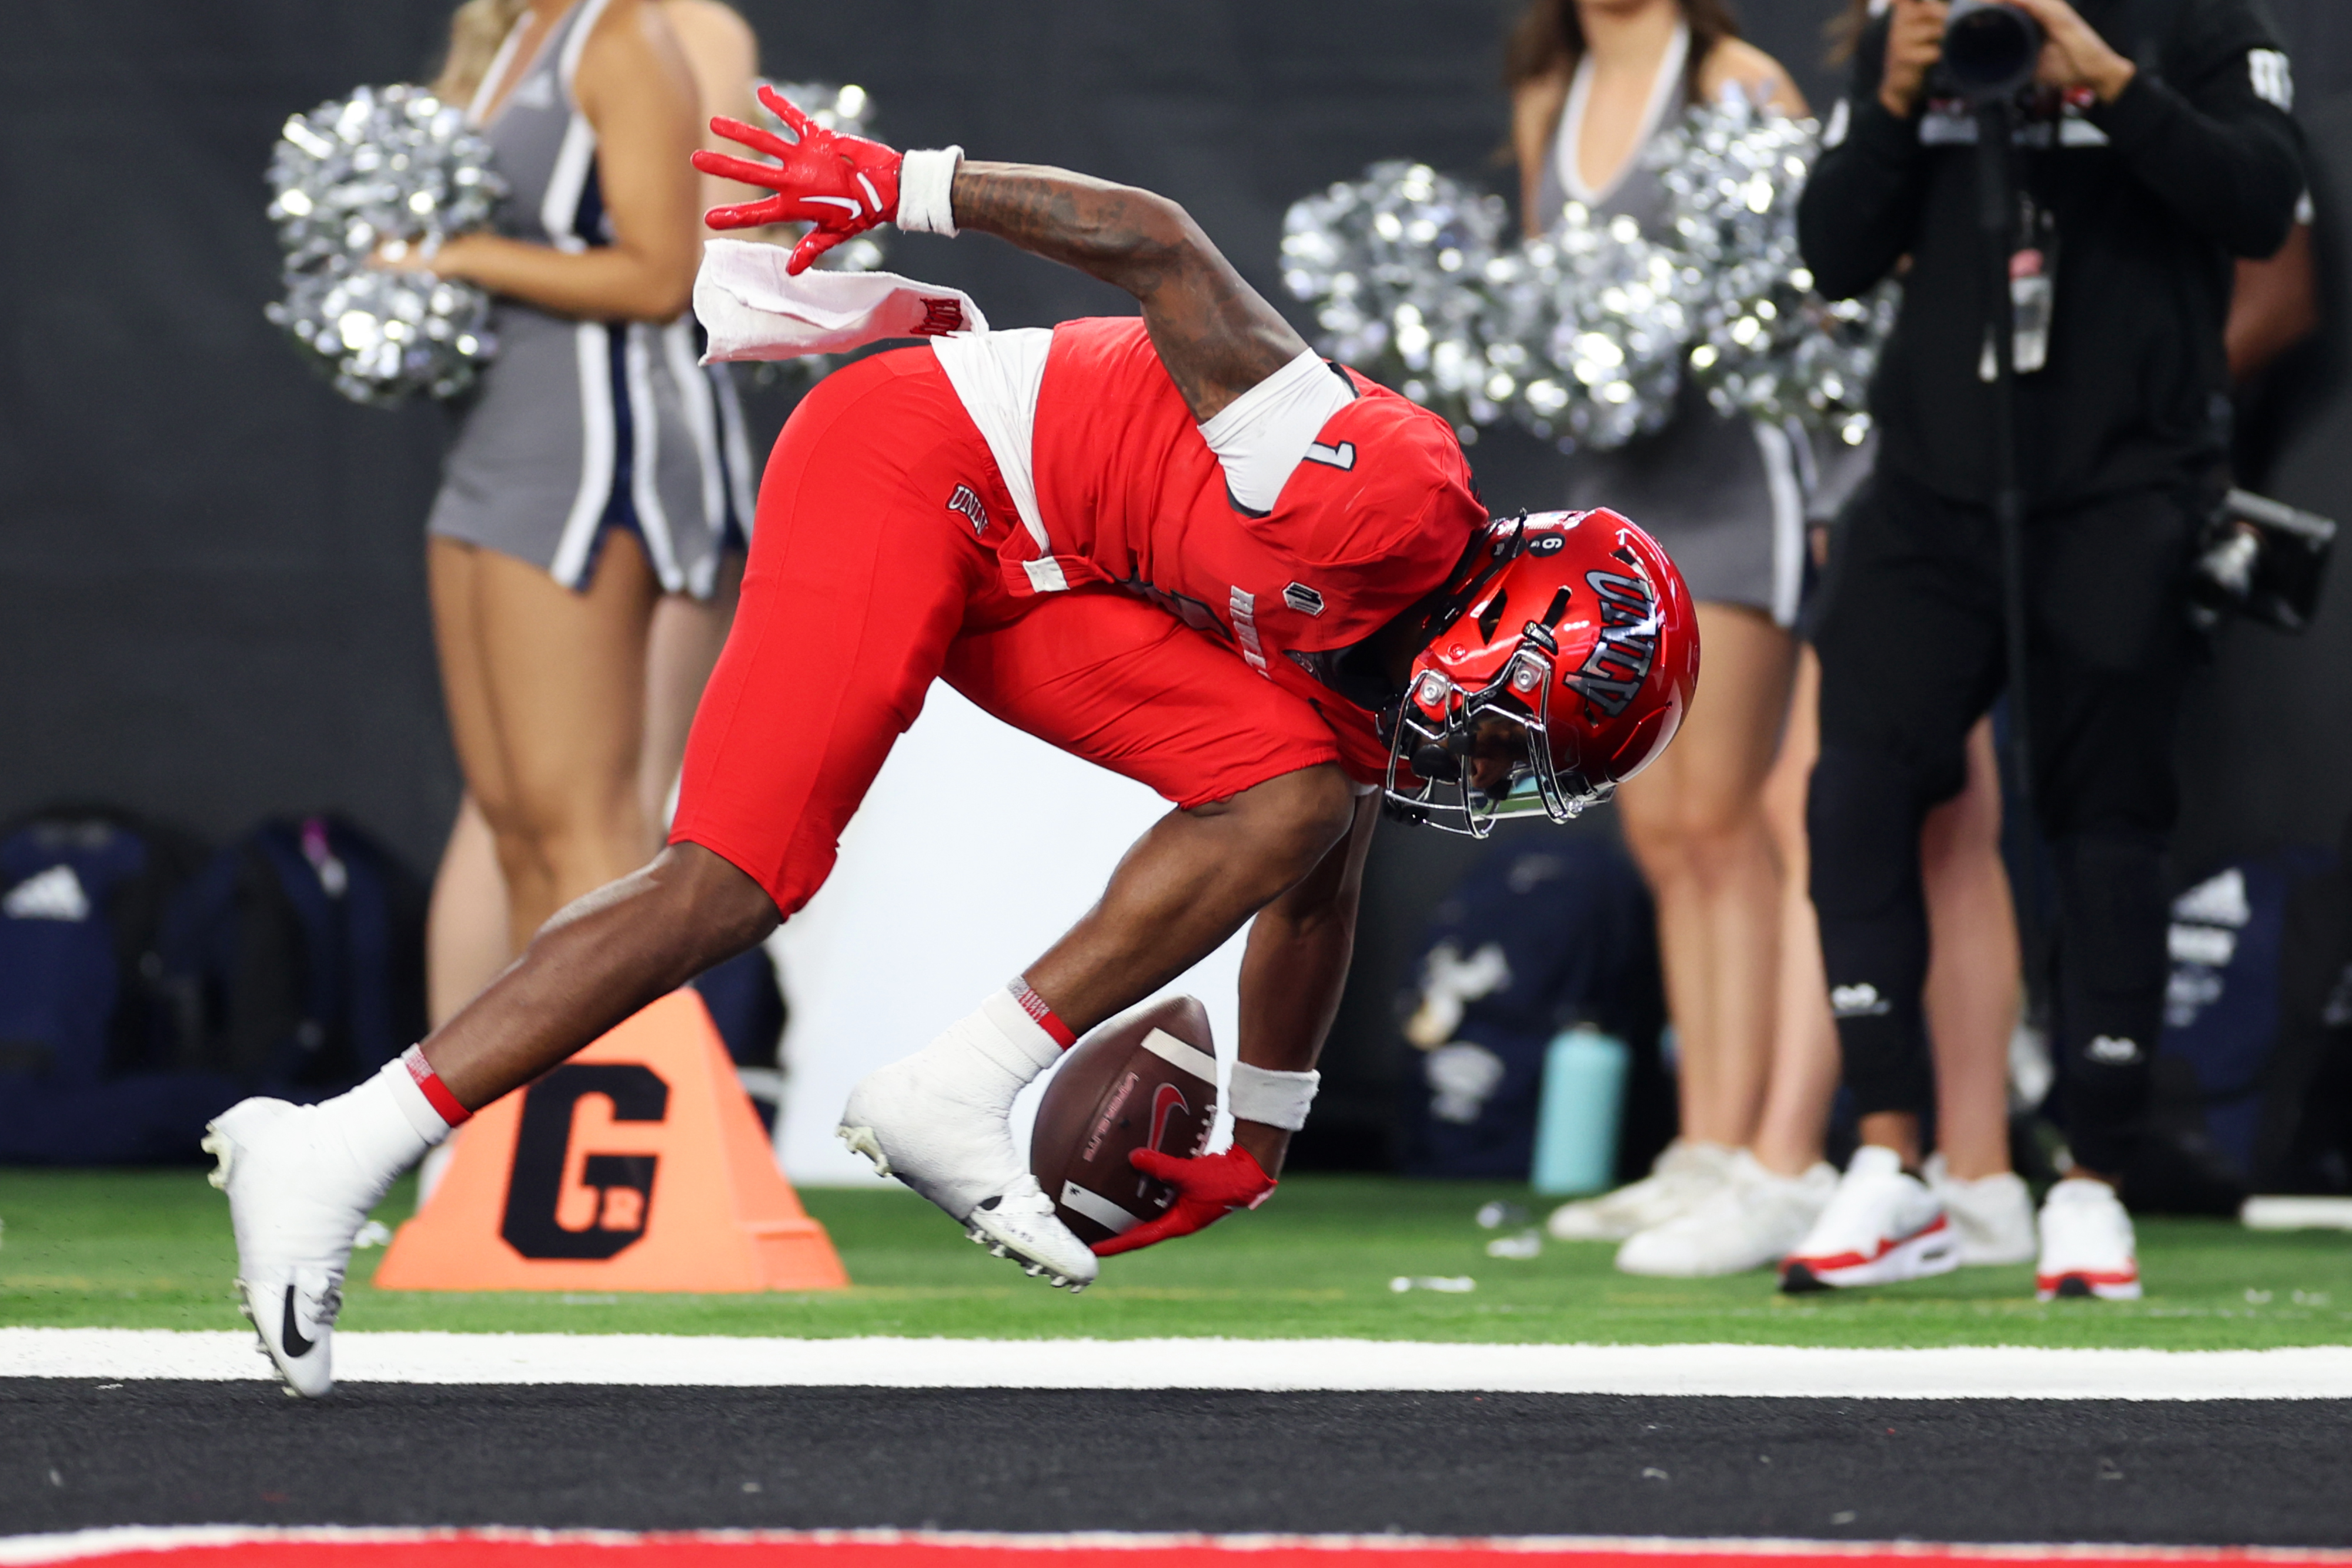 UNLV stops UNR in final seconds to claim Fremont Cannon